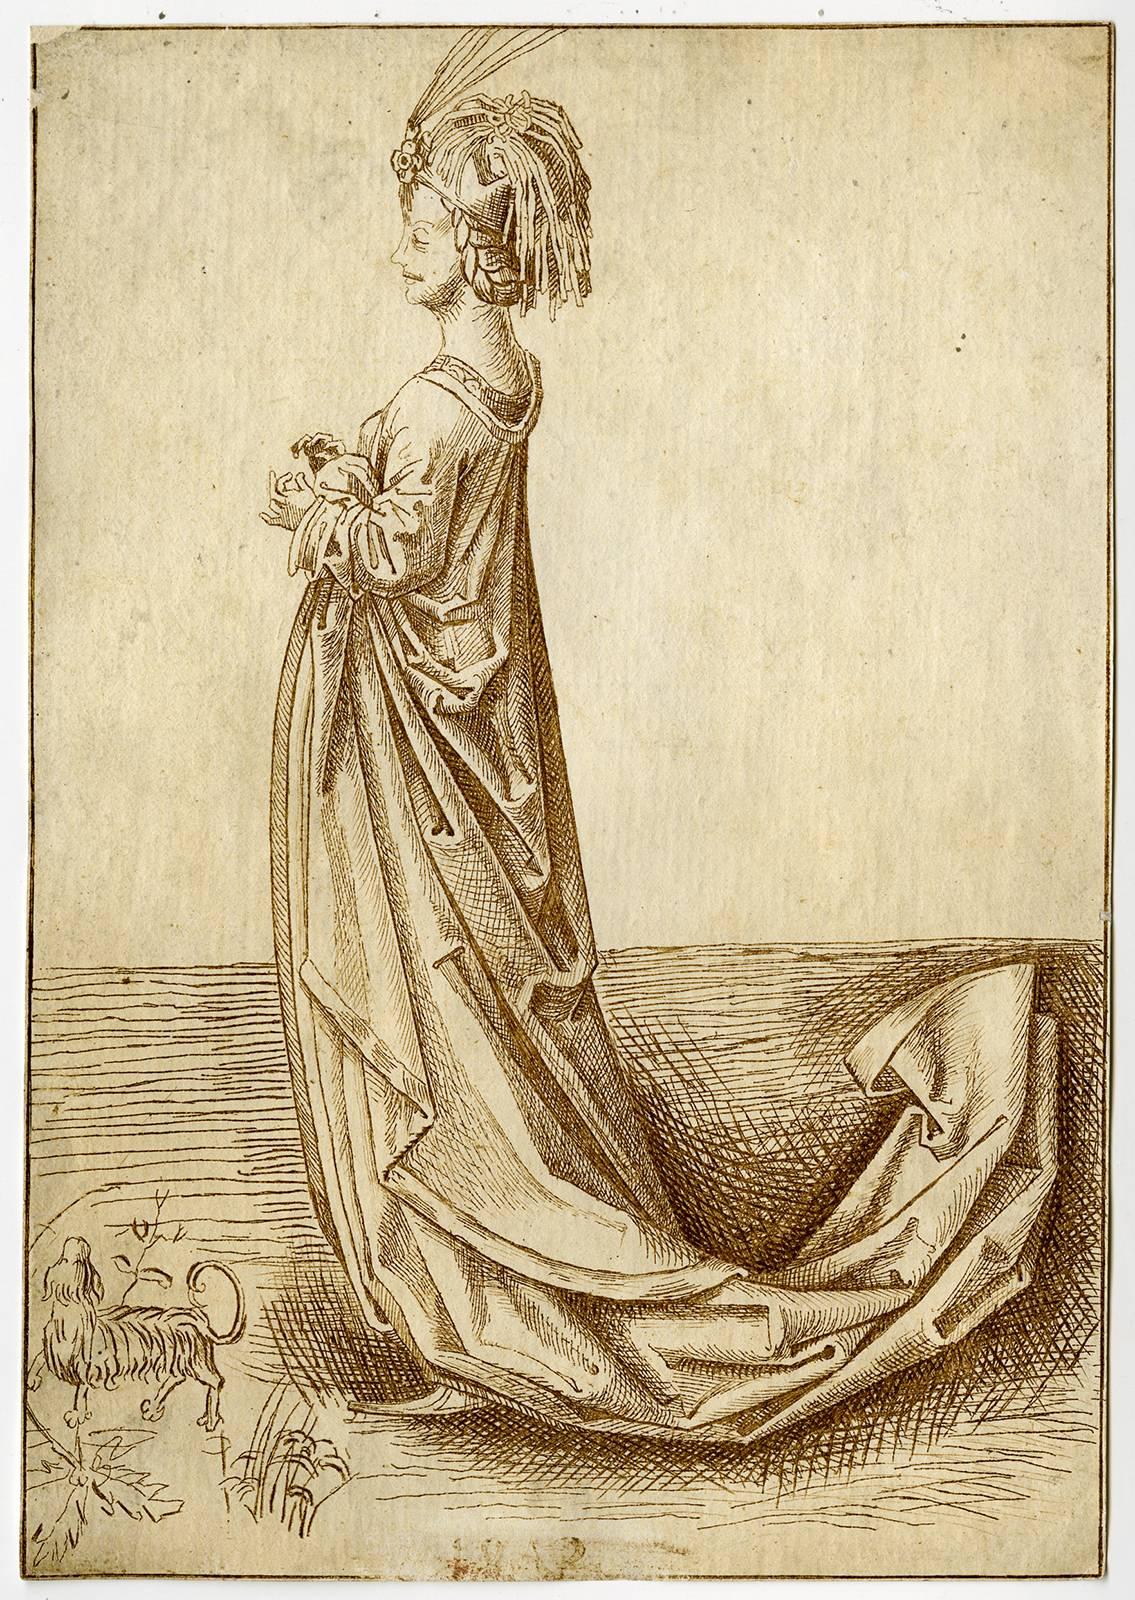 Maria Katharina Prestel Portrait Print - Untitled - A lady in a long dress and elaborate headdress with a dog.